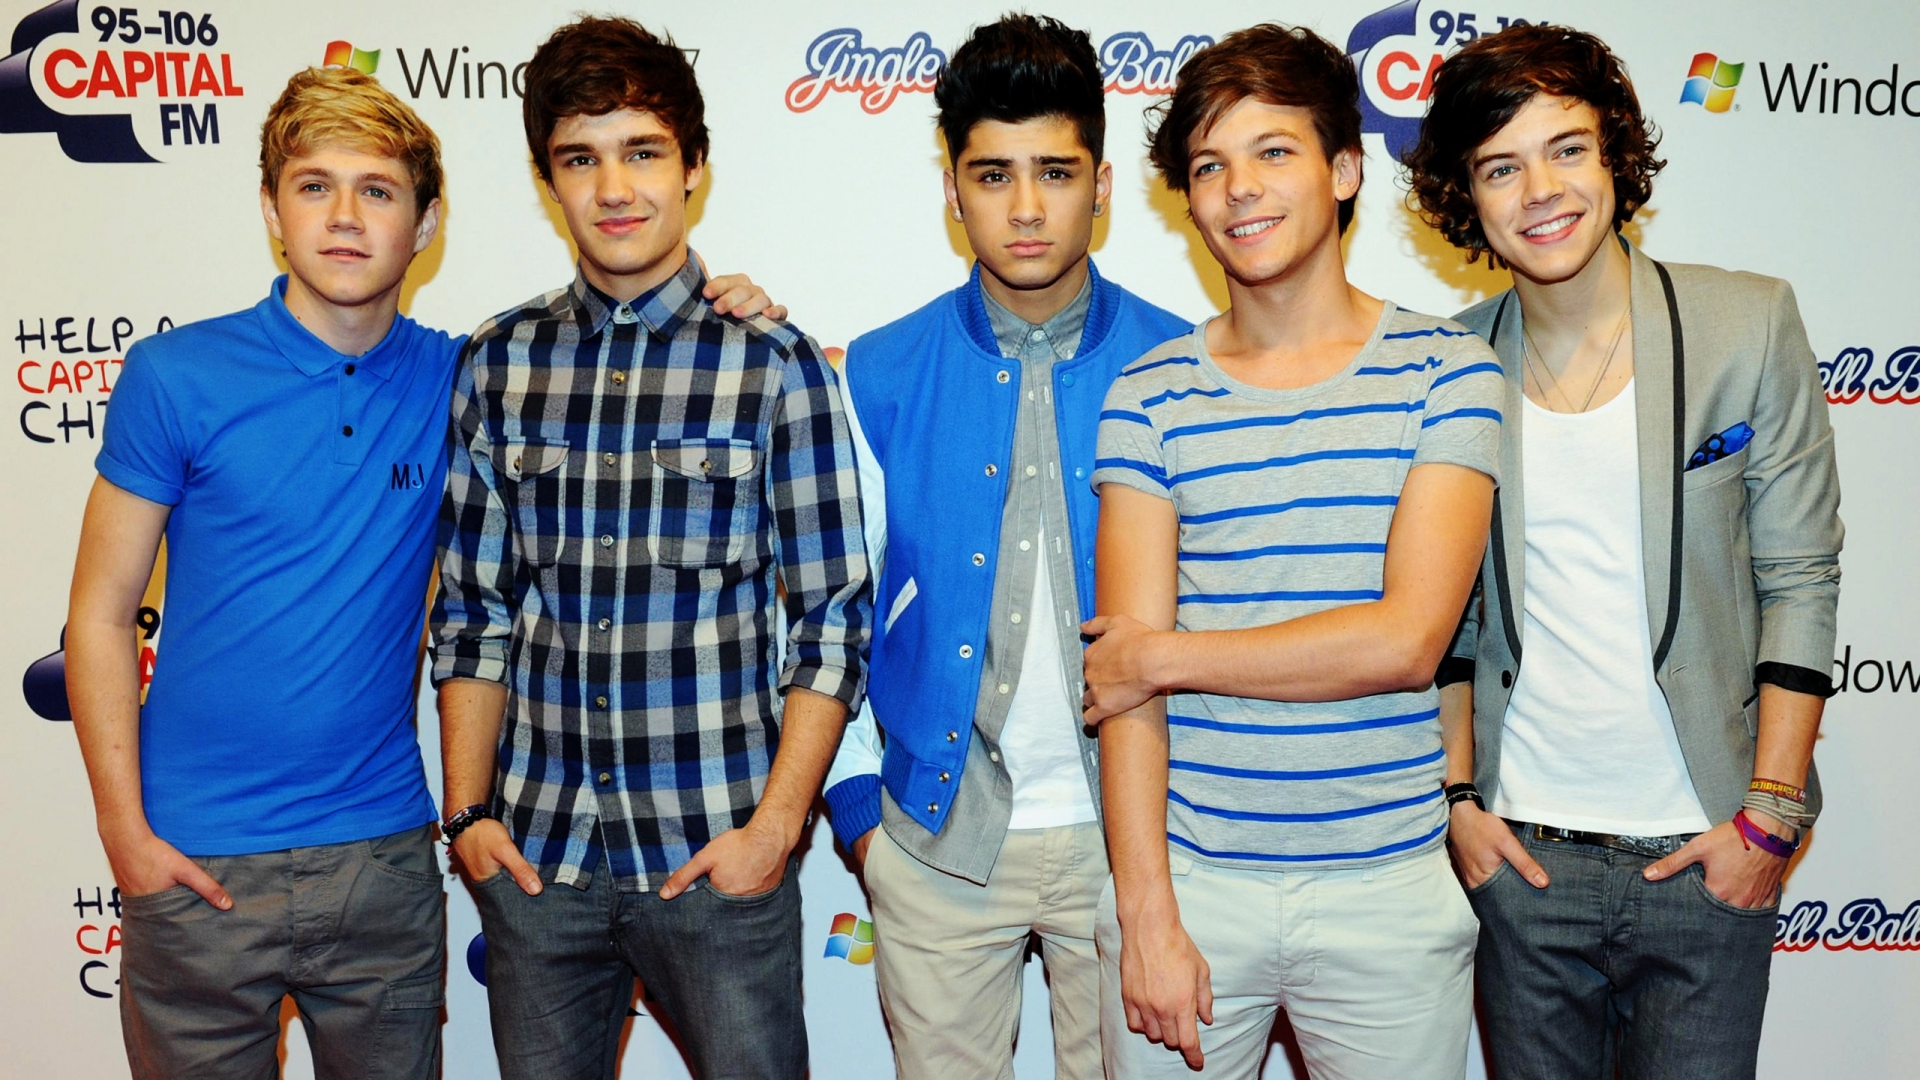 One Direction for 1920 x 1080 HDTV 1080p resolution